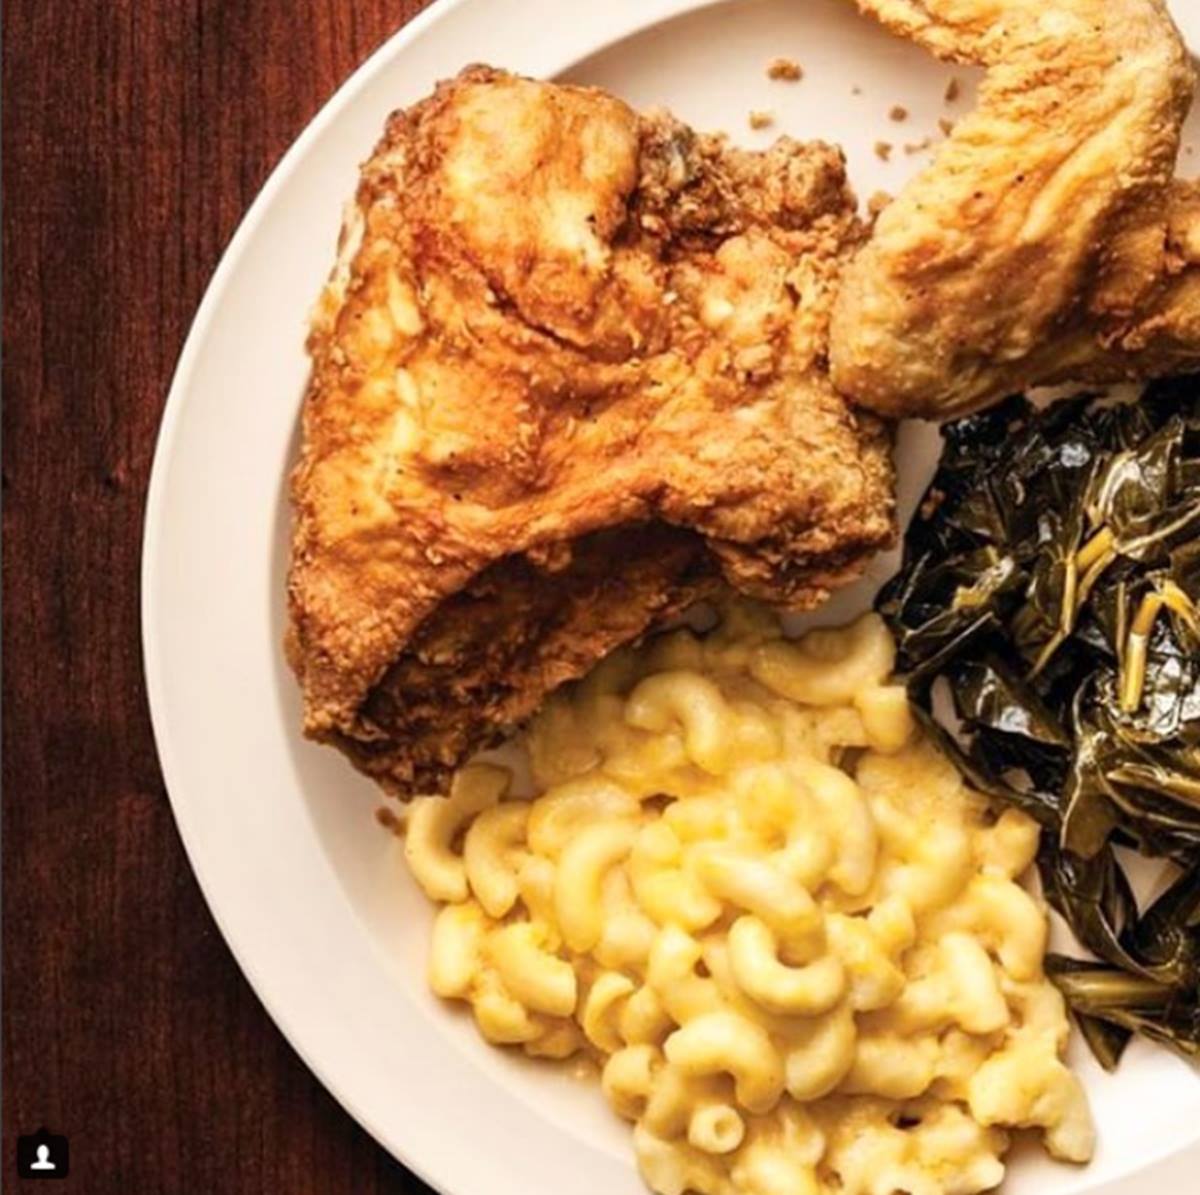 Fried chicken, collards, and mac and cheese from Busy Bee Cafe in Vine City Atlanta.